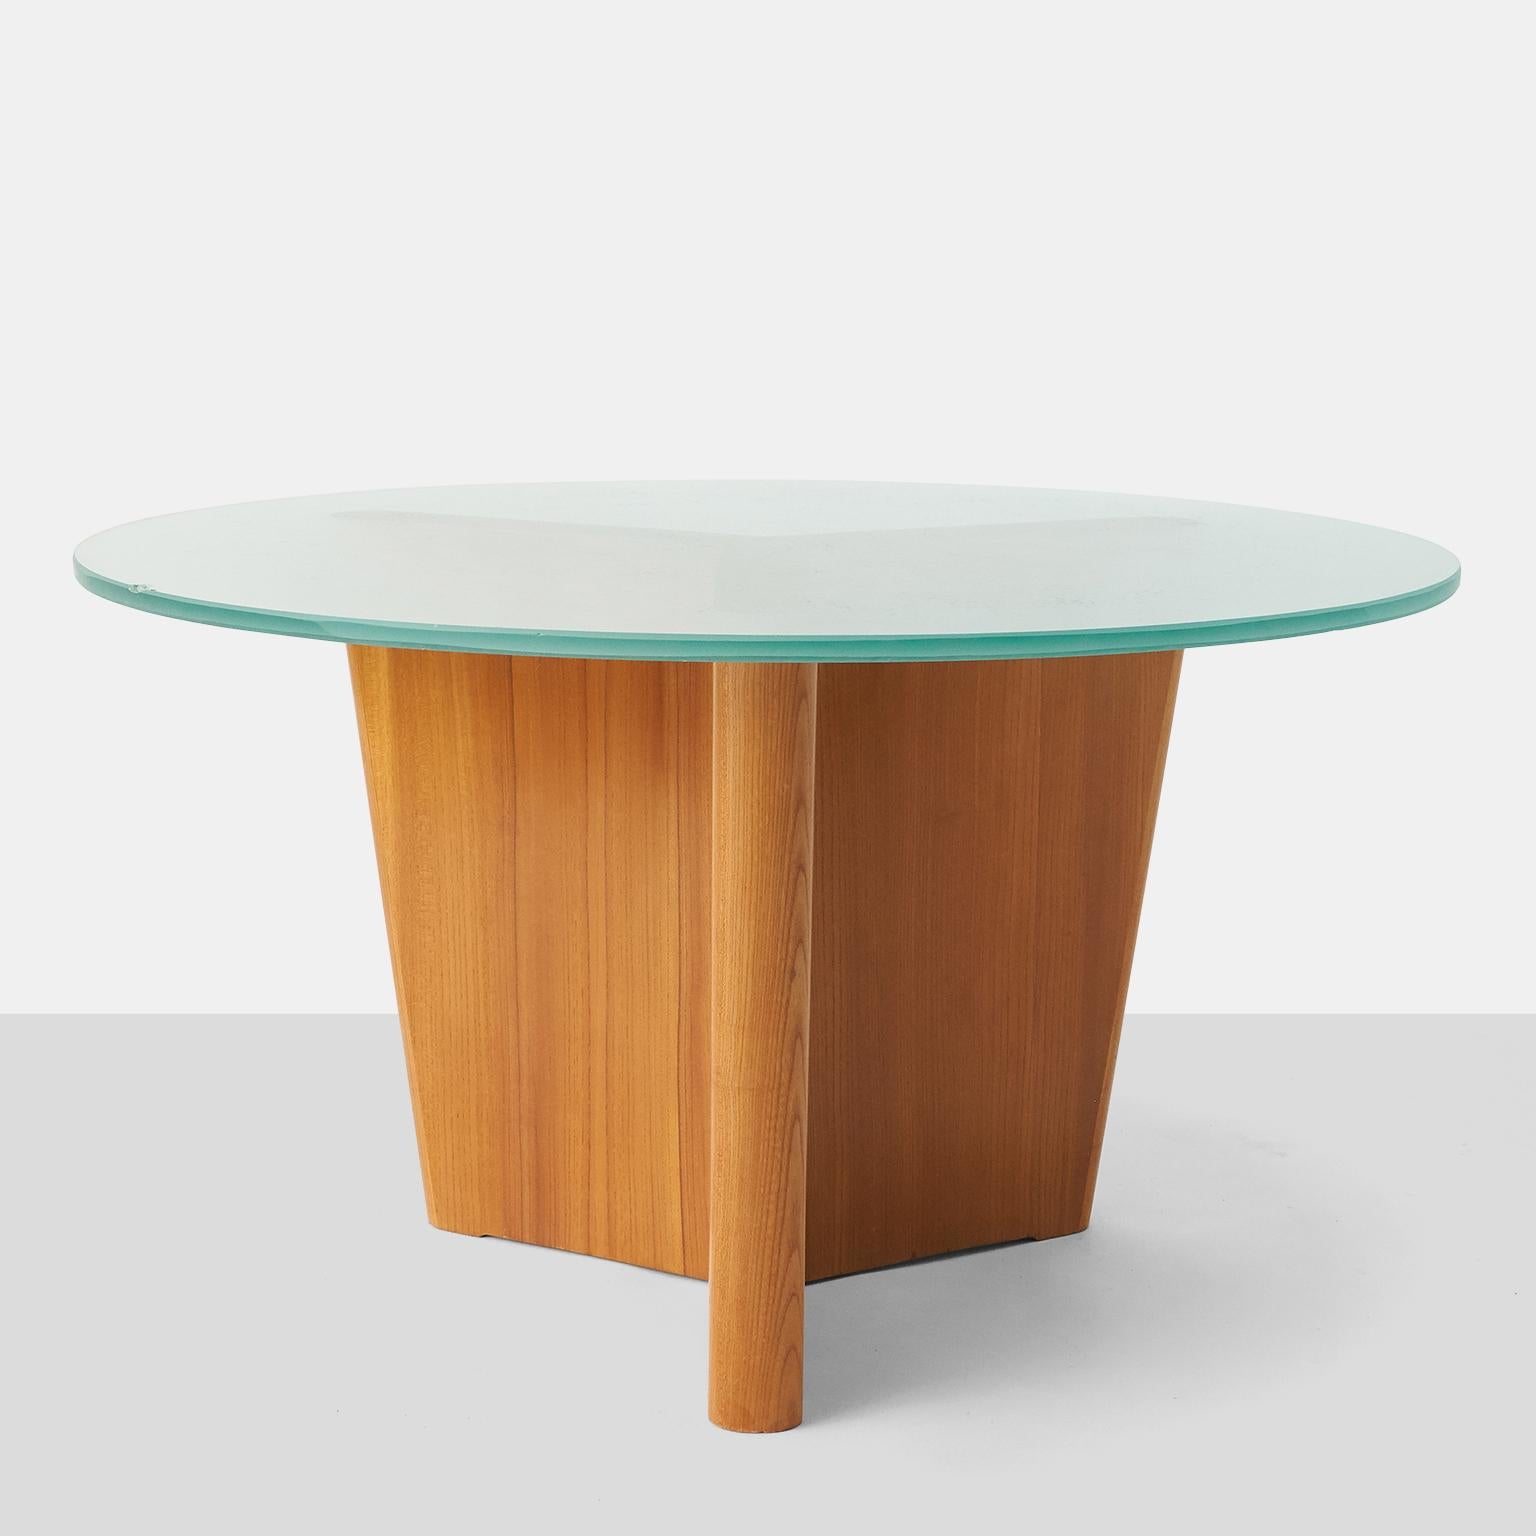 A round, etched glass coffee table with a tri-pronged base in elm. The frosted green glass top is etched with an ocean flora and fauna design.

Literature: Evan Snyderman & Karin Aberg Waerm, Greta Magnusson Grossman - A Car and Some Shorts,